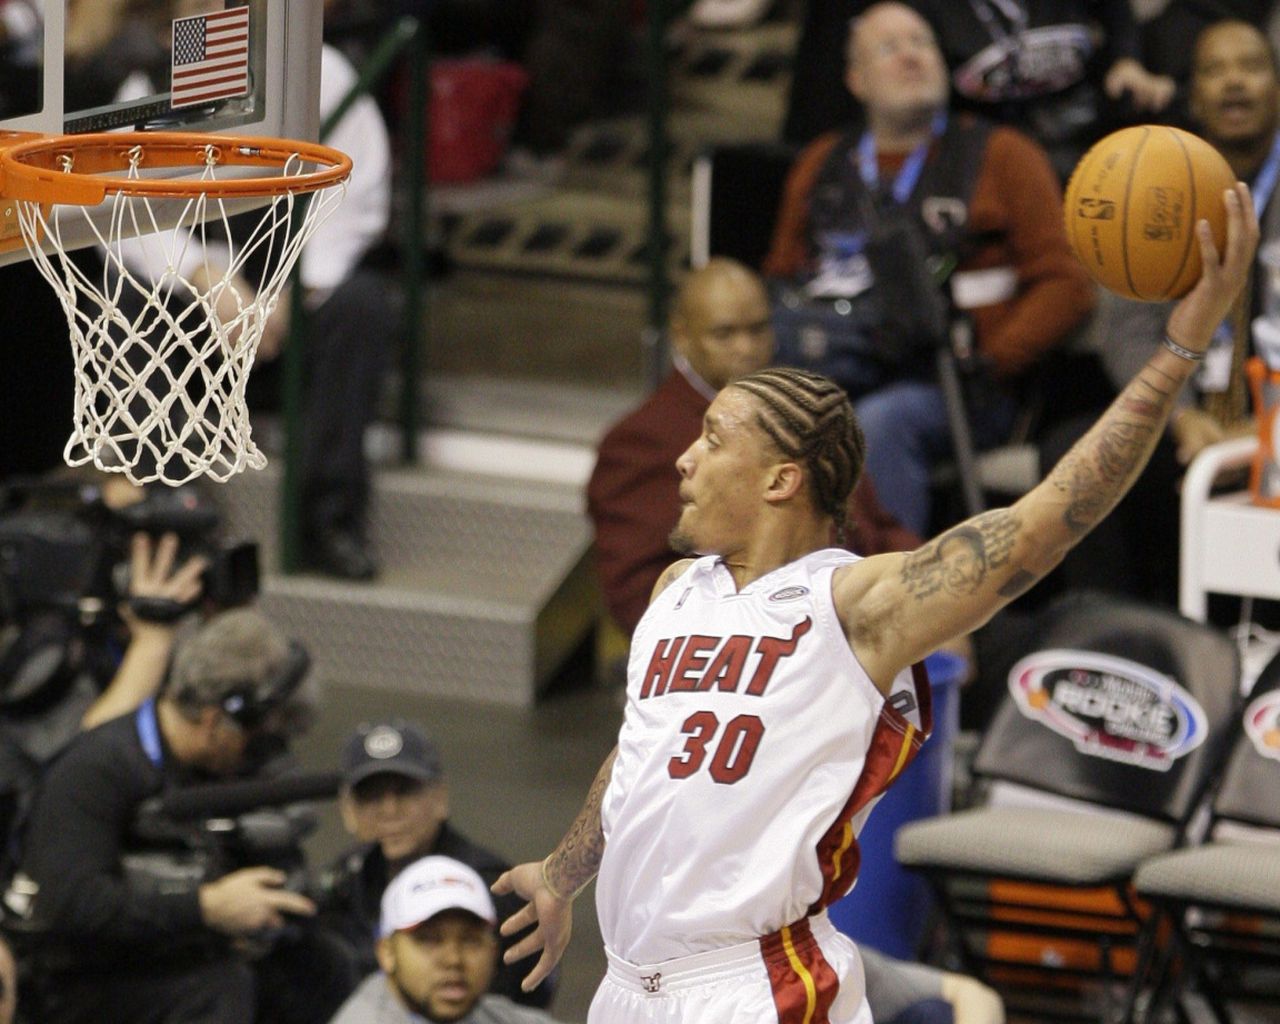 Michael Beasley signs with Miami Heat, hoping to revive troubled NBA career